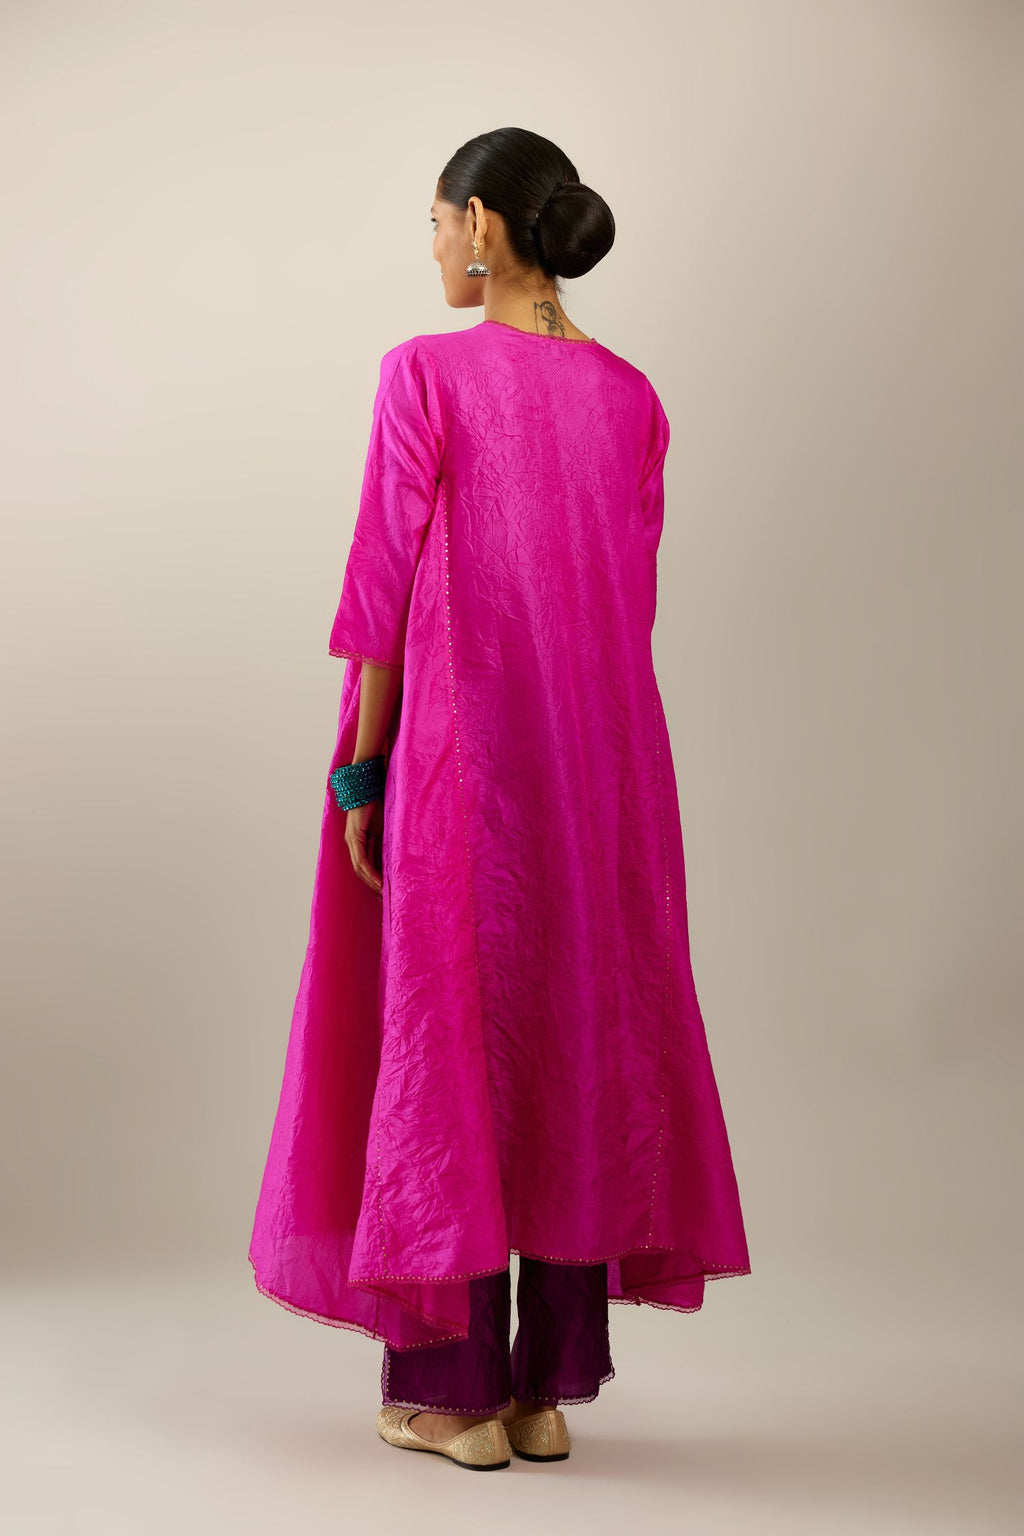 Fiji fuchsia hand crushed silk kurta set with asymmetric hem, highlighted with gold sequins and embroidered scalloped organza at edges.